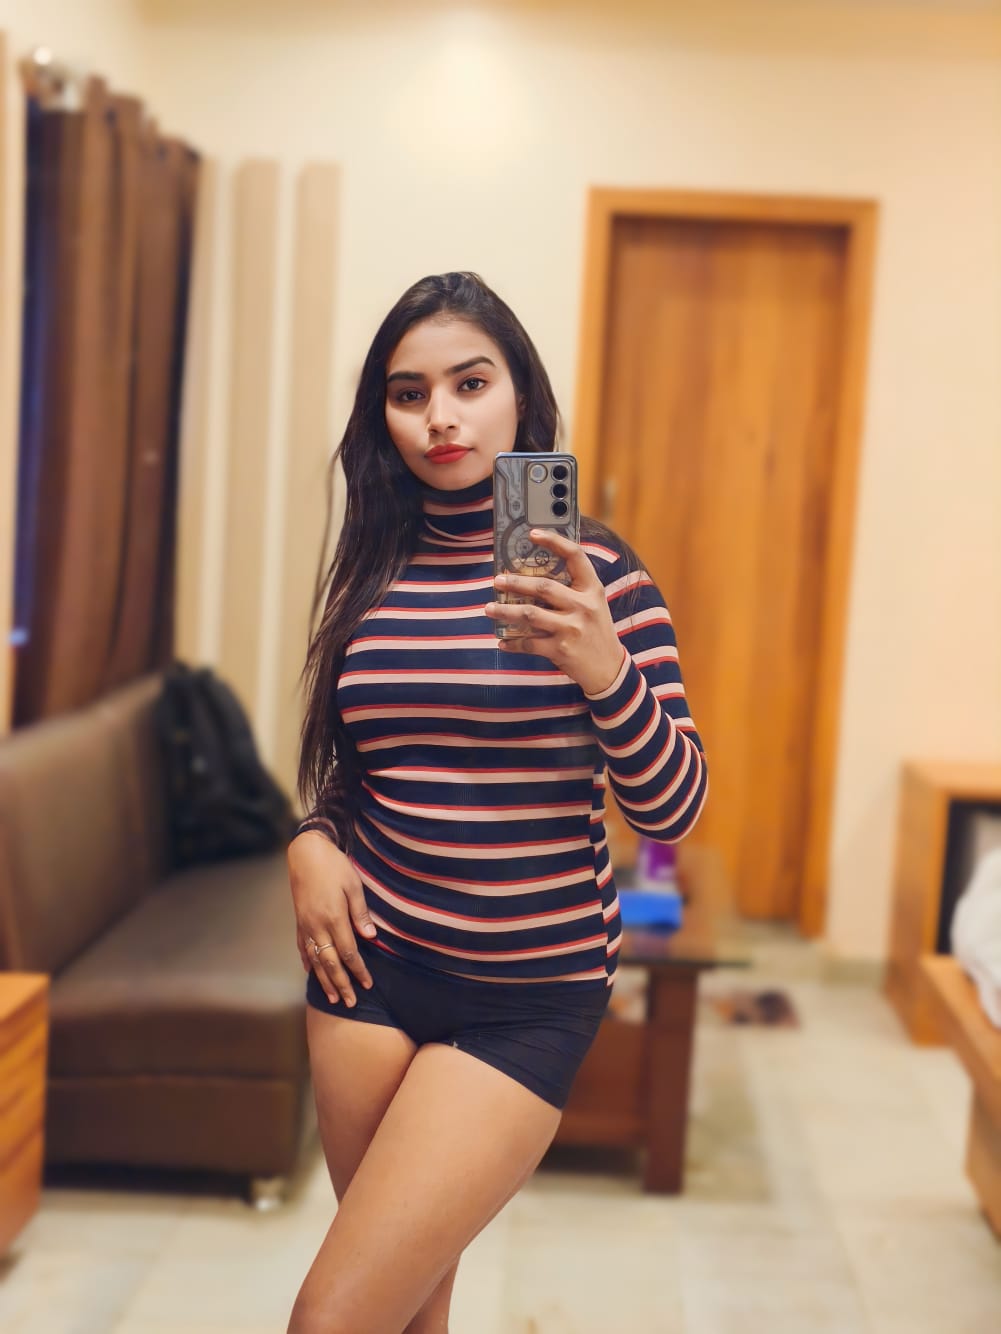 menaka rich profile teen collage girl visakhapatnam available